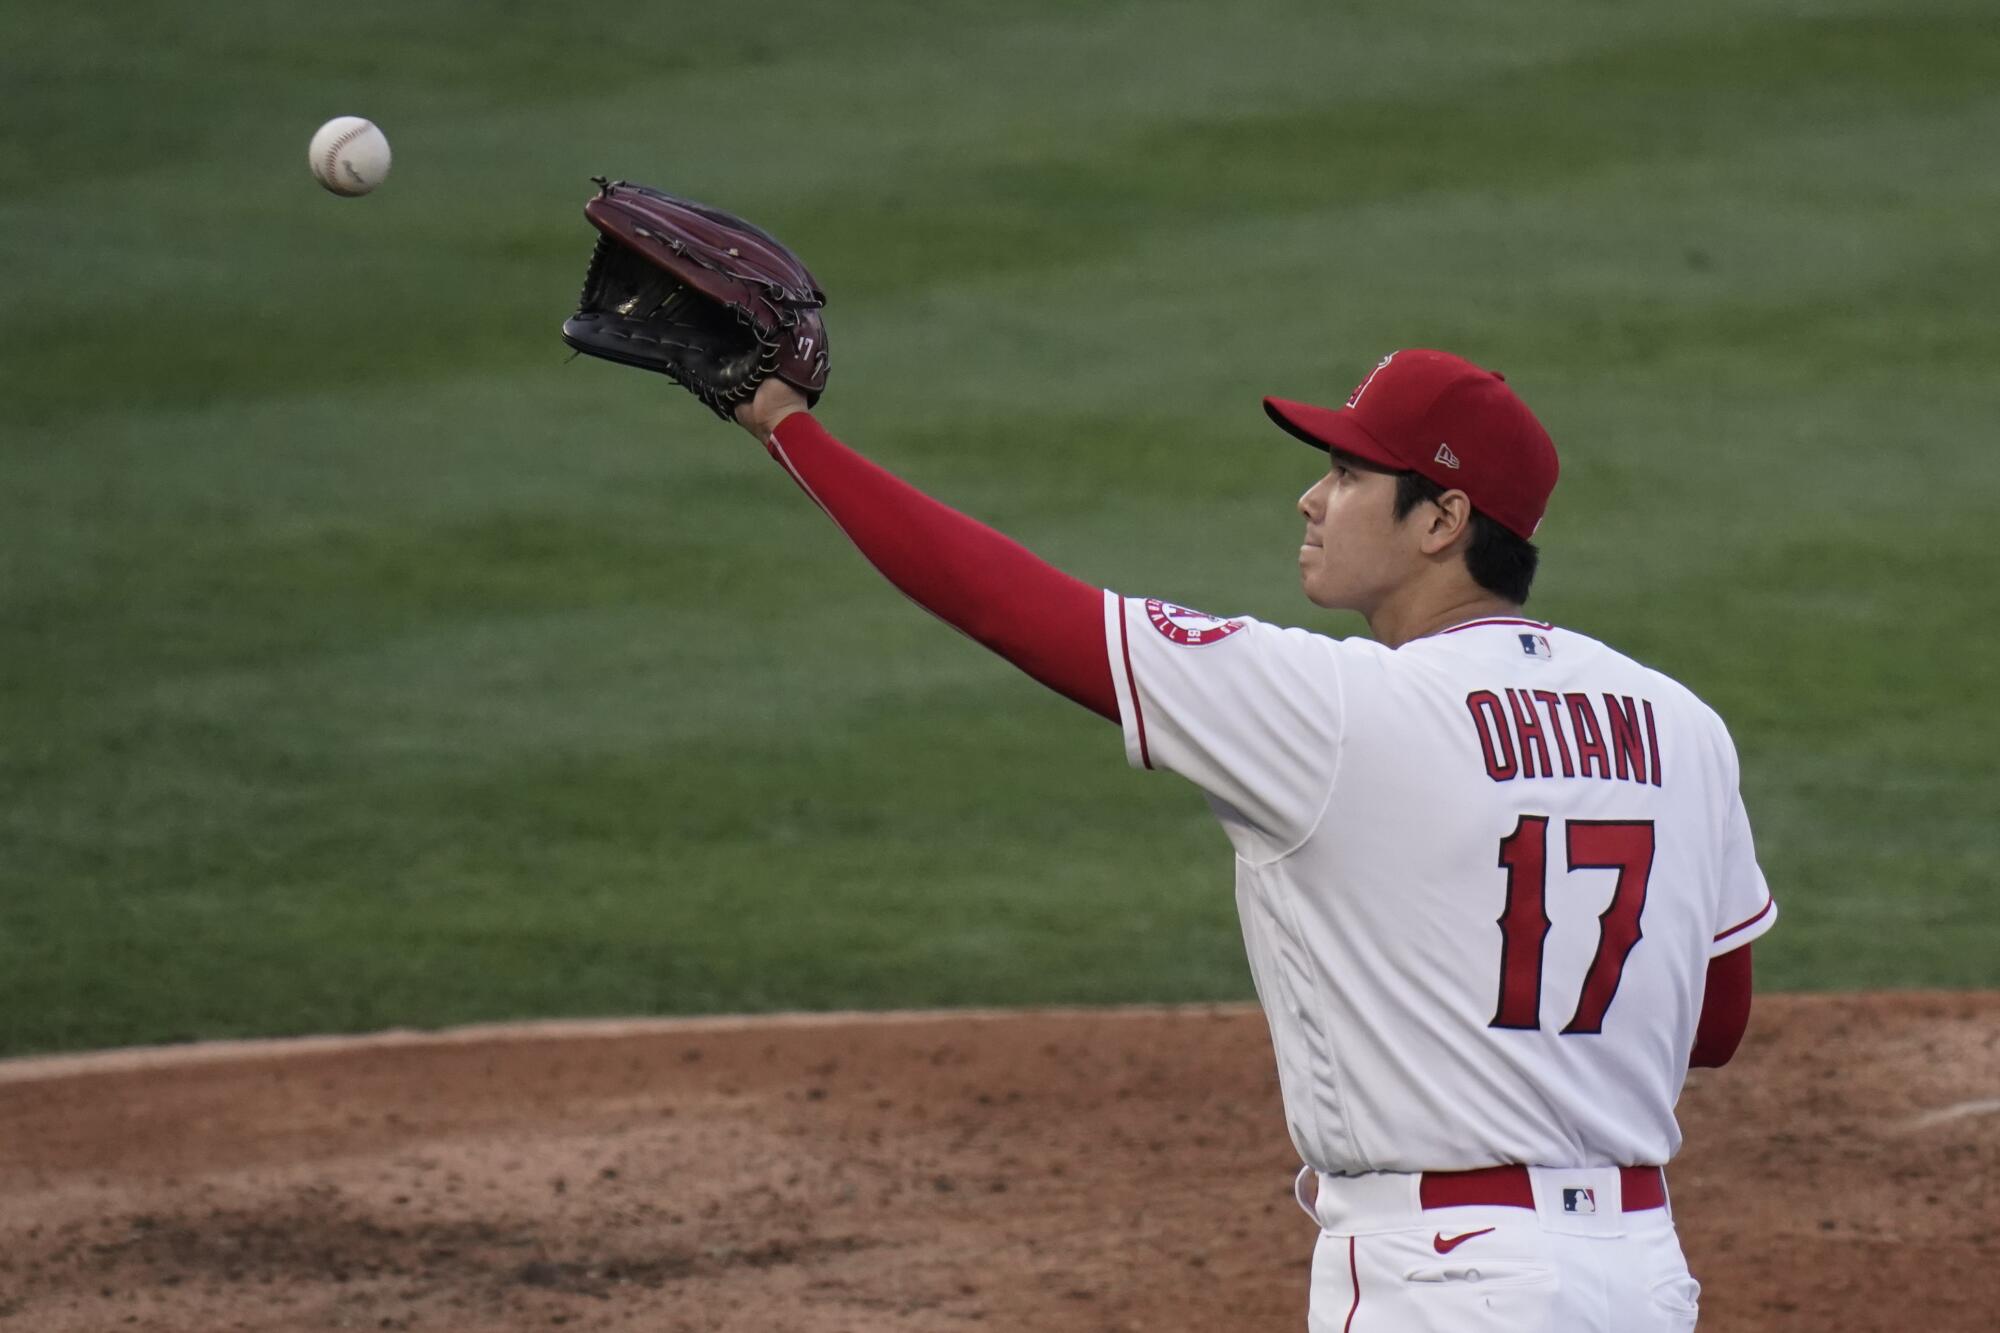 Angels pitcher Shohei Ohtani catches the ball.